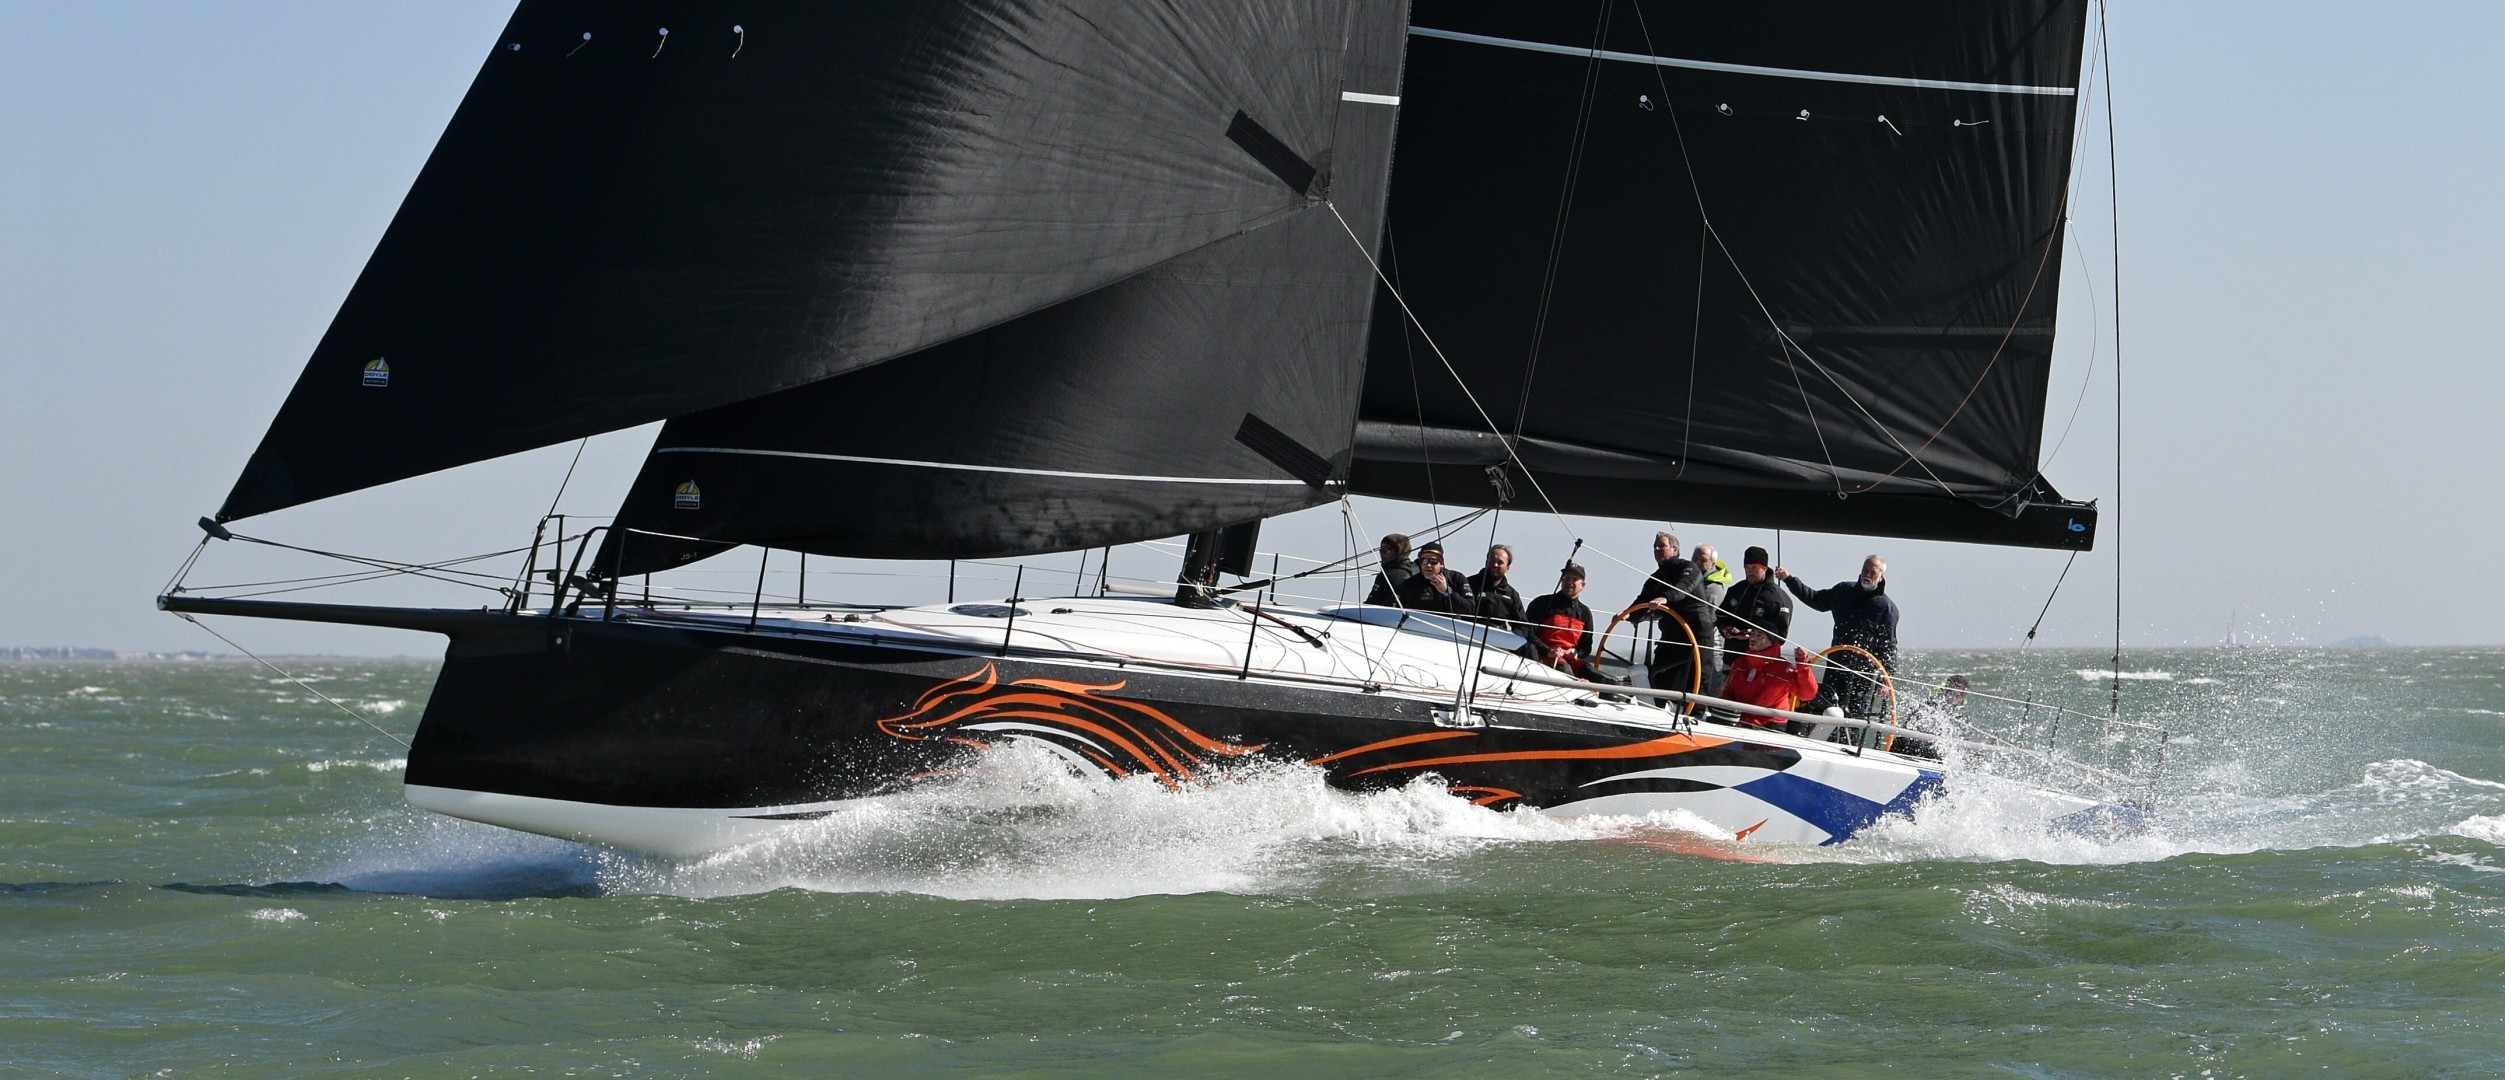 During major offshore races, the Infiniti 52 can sailed by a crew of seven. Photo: Rick Tomlinson/www.rick-tomlinson.com